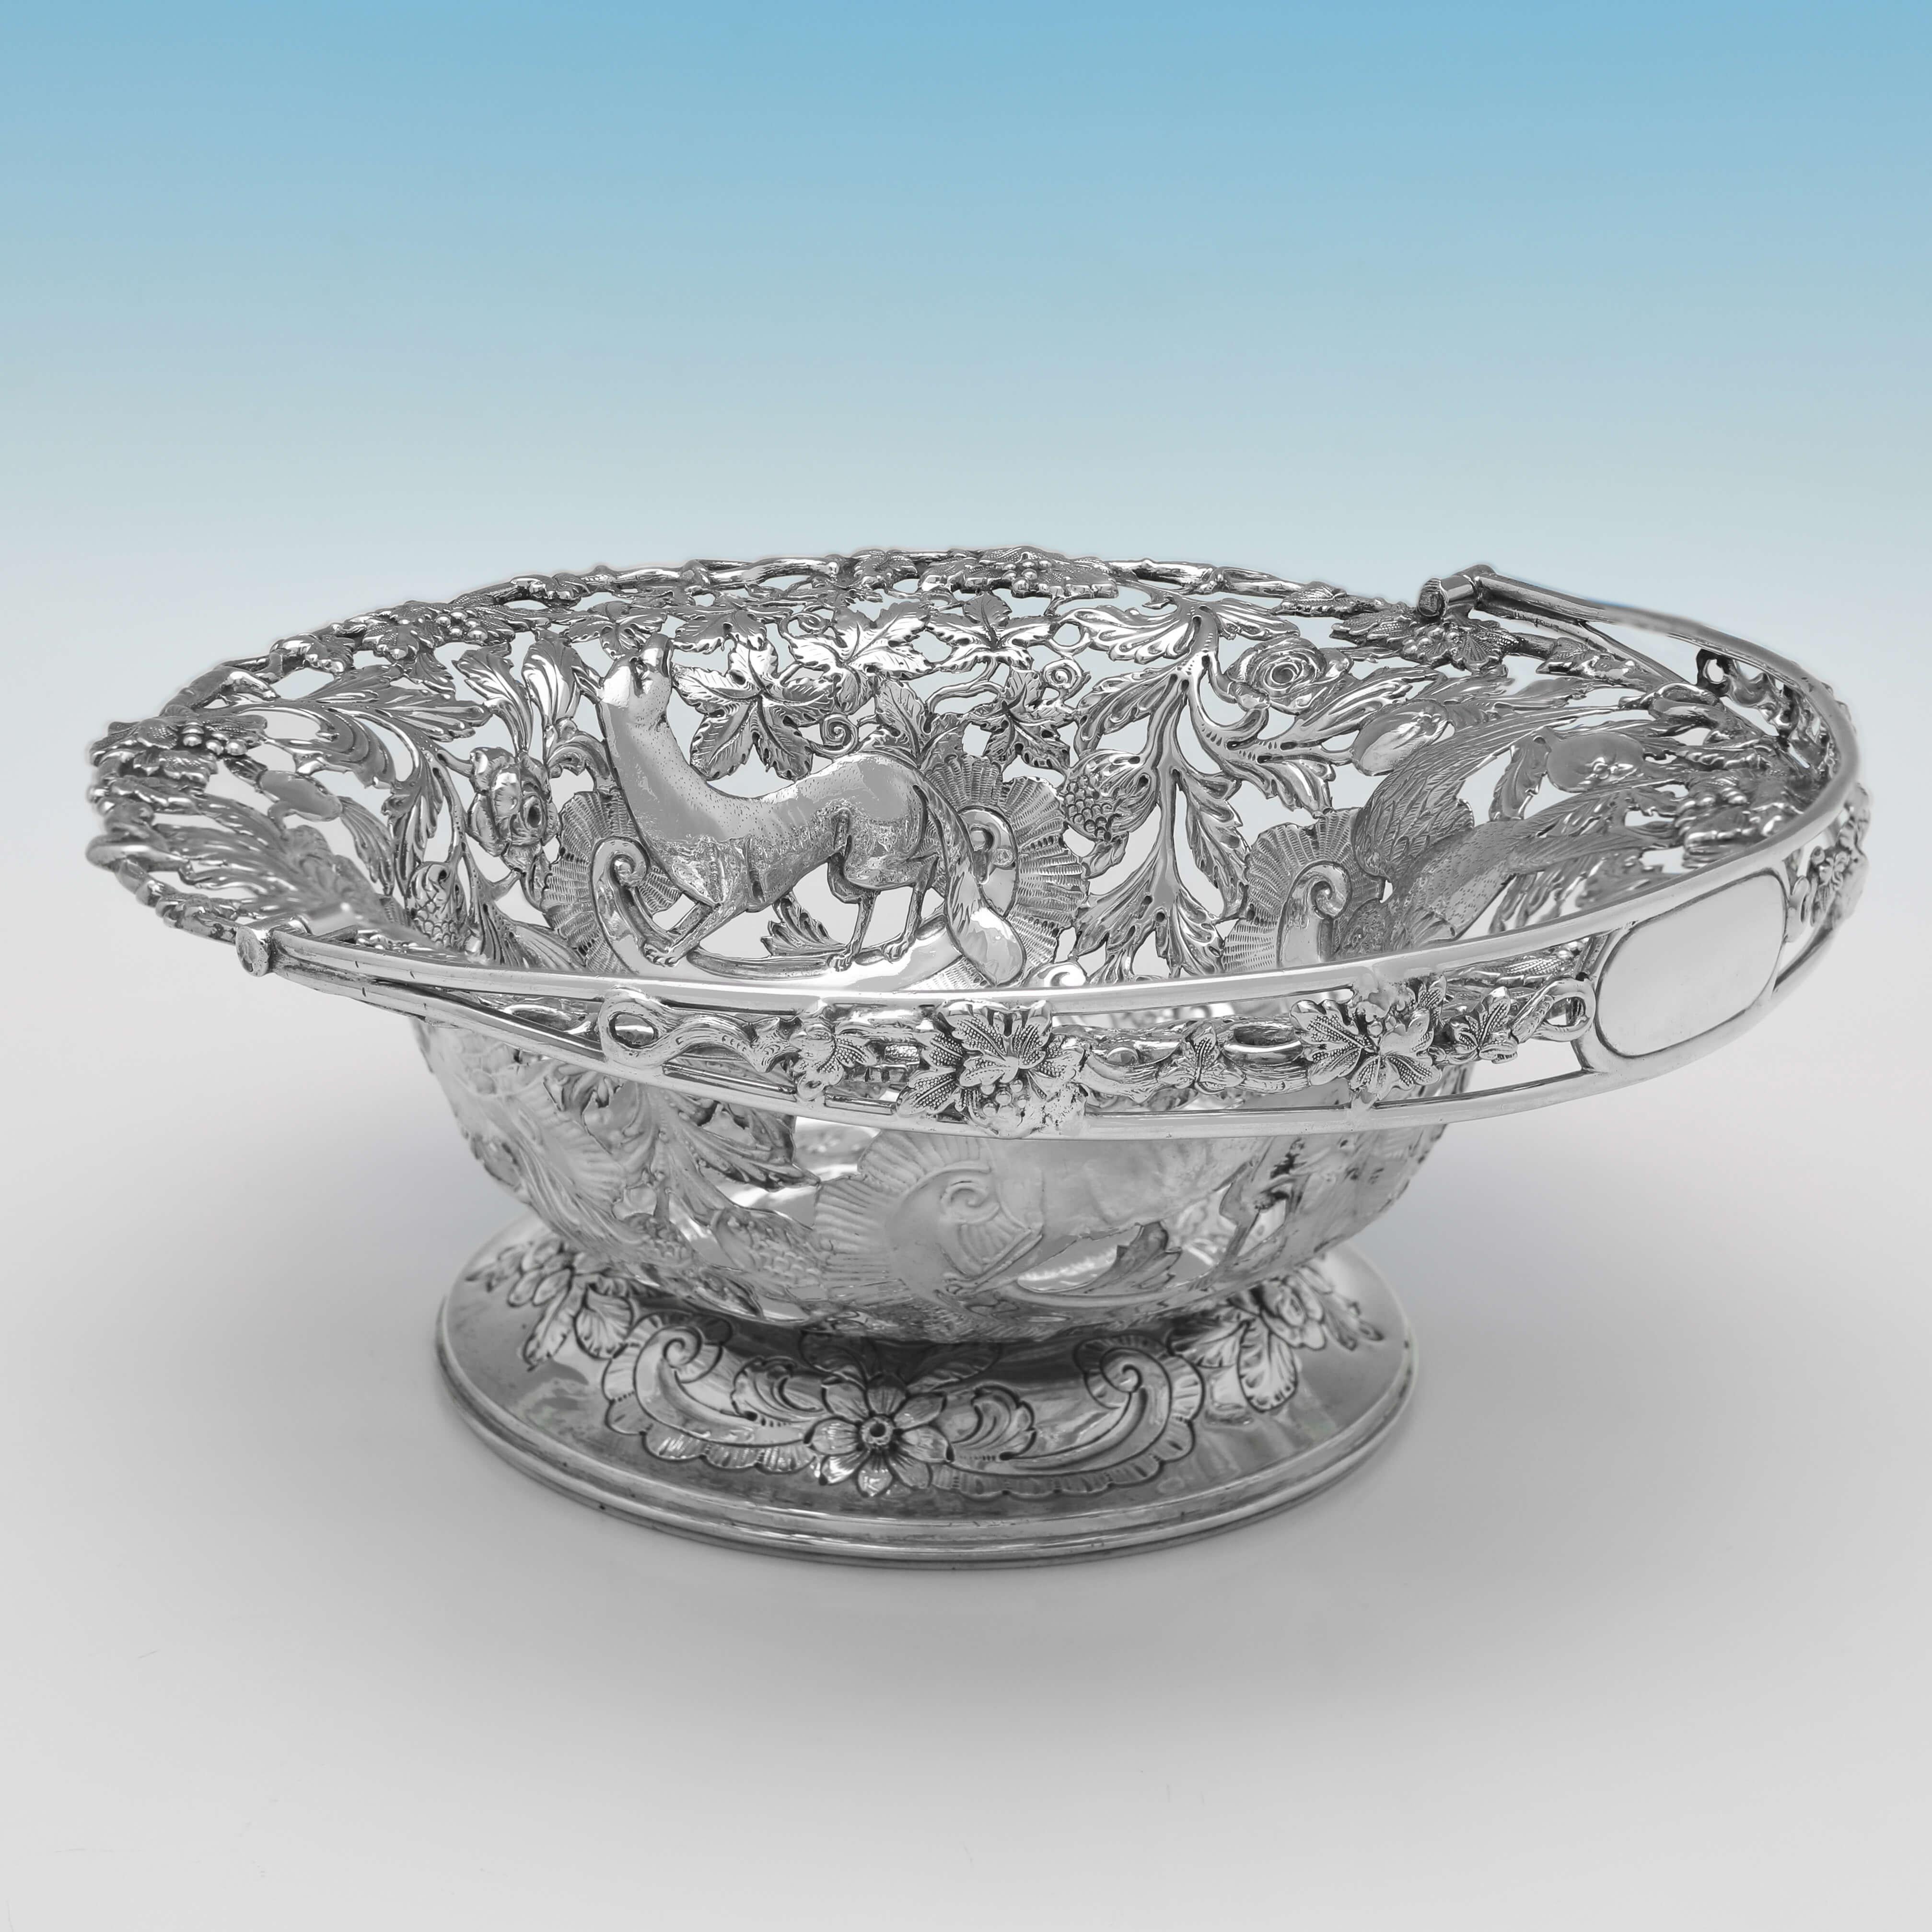 Hallmarked in Dublin in 1911 by Wakely & Wheeler, this striking, Antique Sterling Silver Basket, is round in shape, and features pierced and chased floral and fauna decoration, and a pierced swing handle. 

The basket measures 9